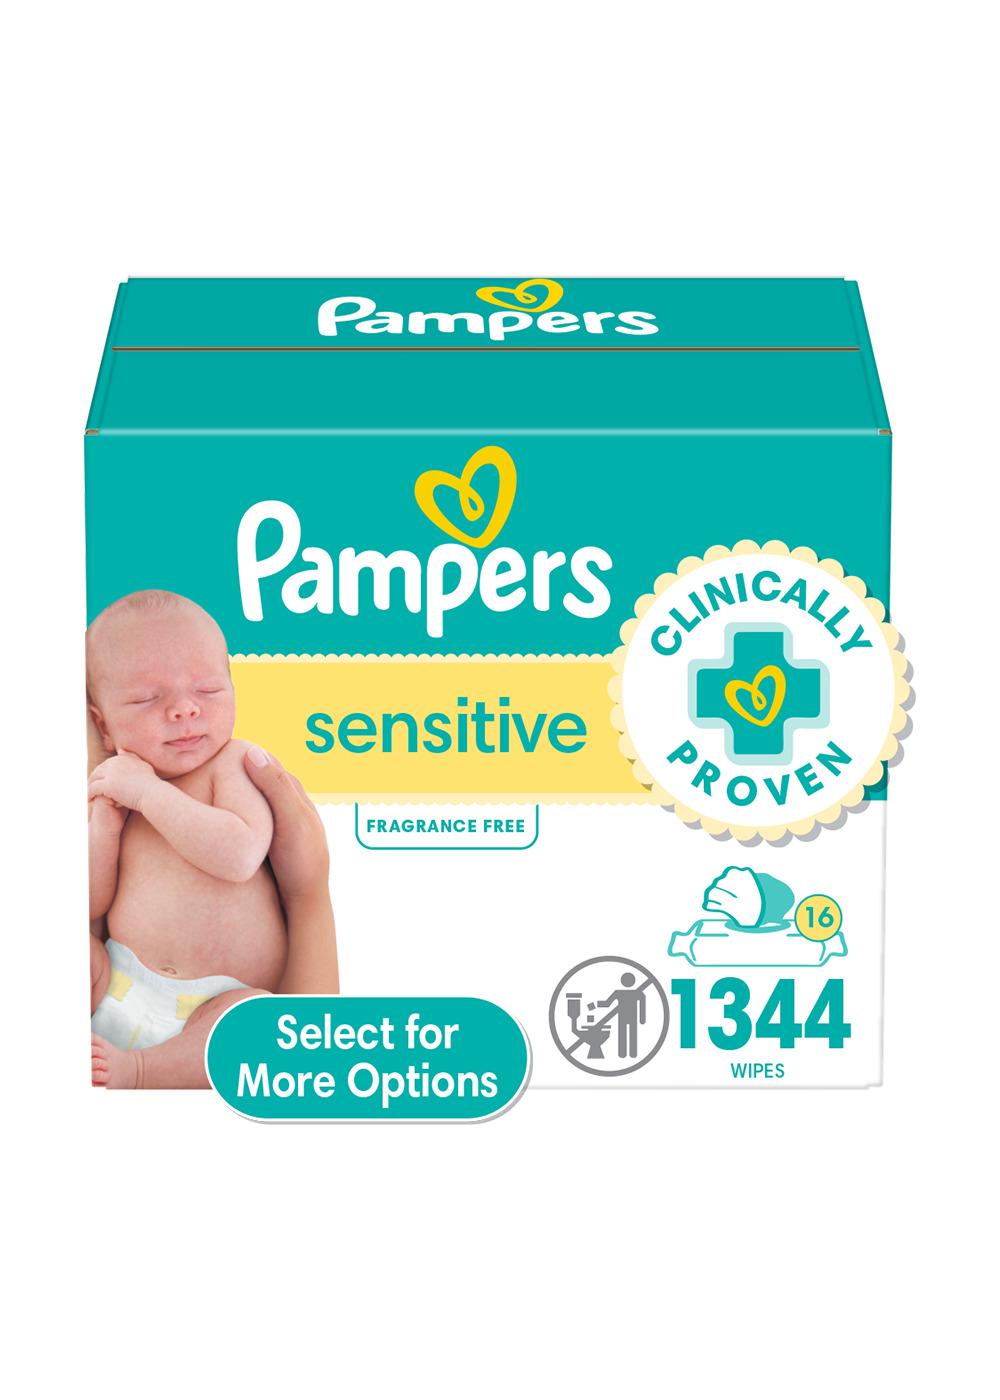 Pampers Sensitive Skin Baby Wipes; image 1 of 10